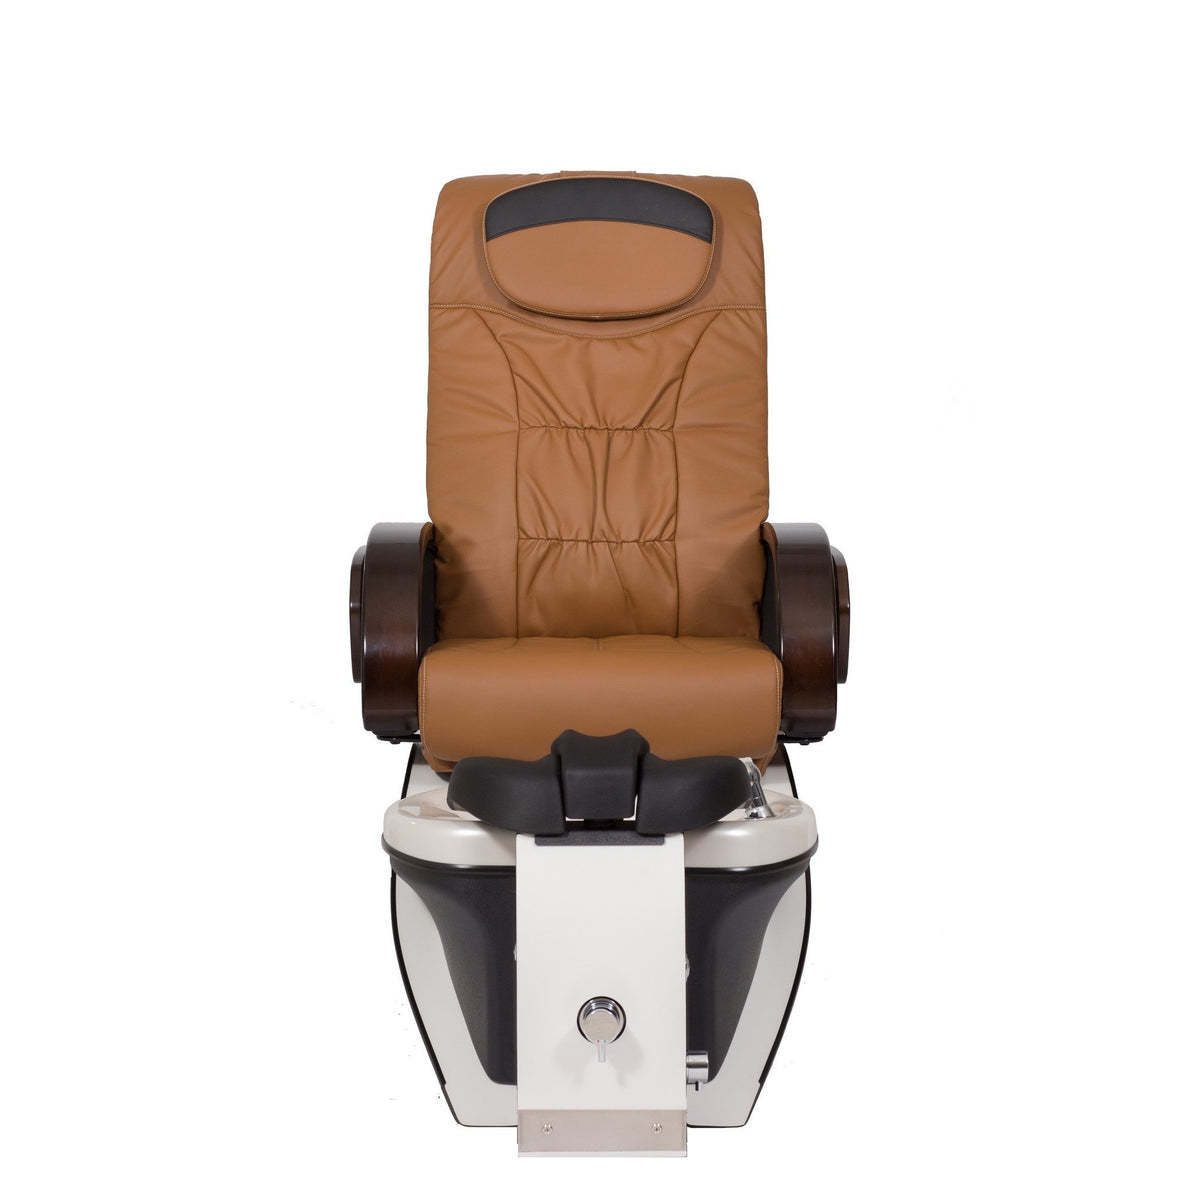 Continuum Continuum Echo LE Pedicure Spa Chair Pedicure &amp; Spa Chairs - ChairsThatGive